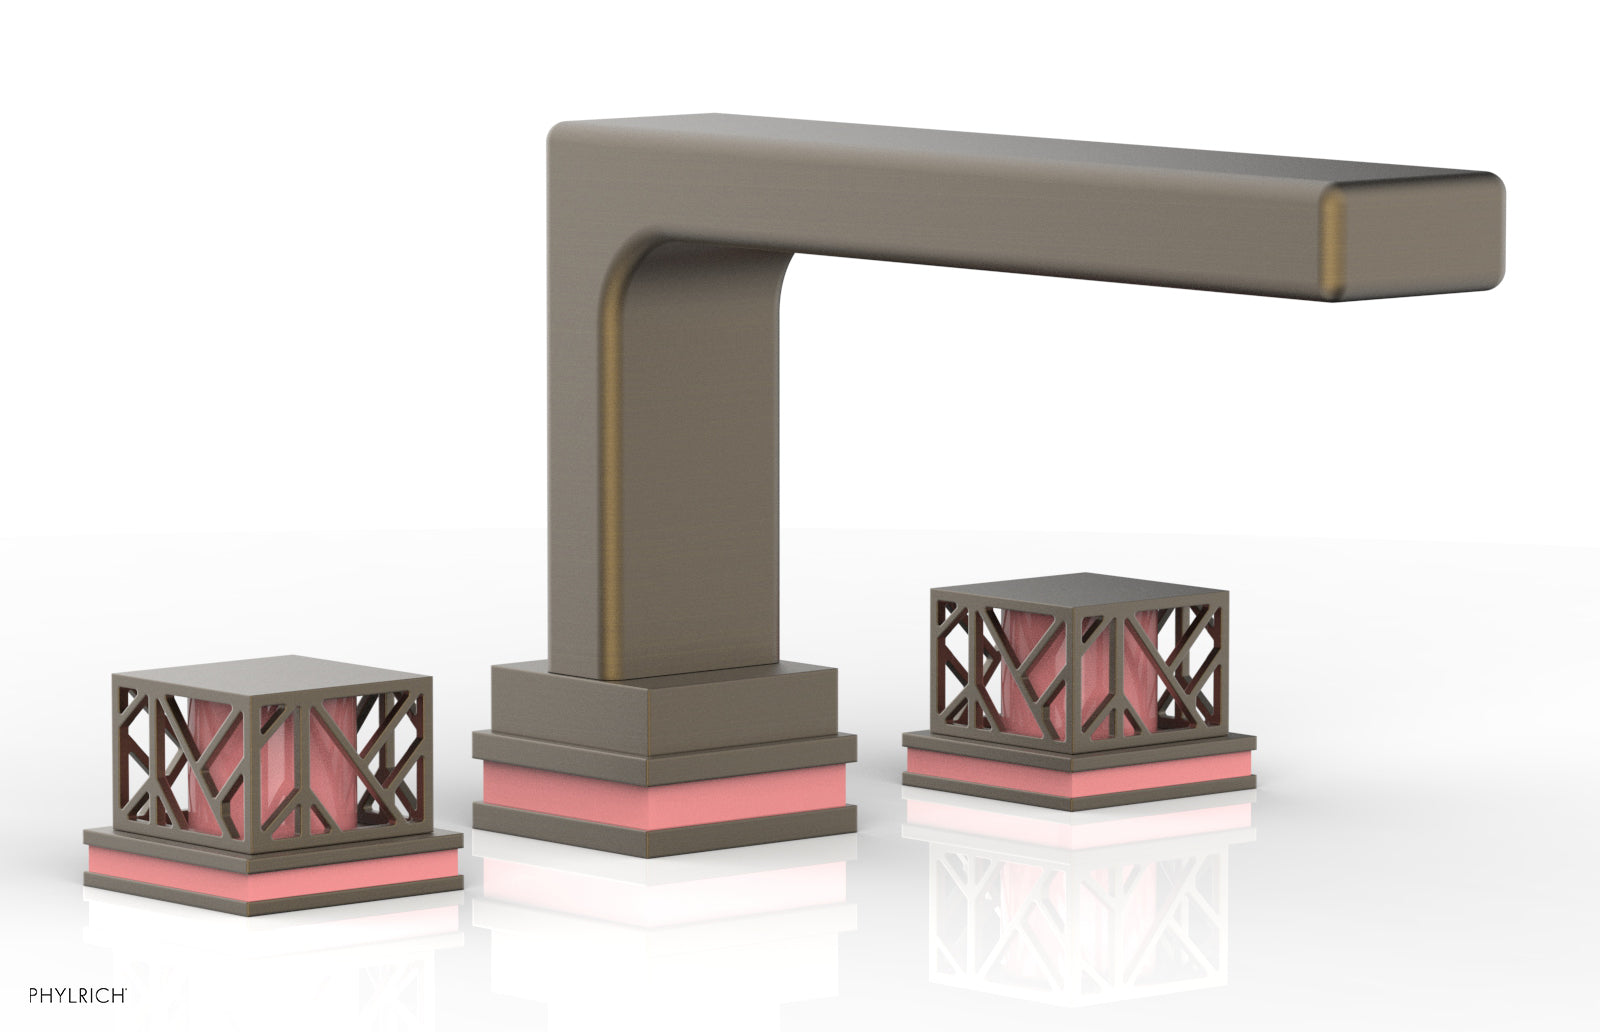 Phylrich JOLIE Deck Tub Set - Square Handles with "Pink" Accents